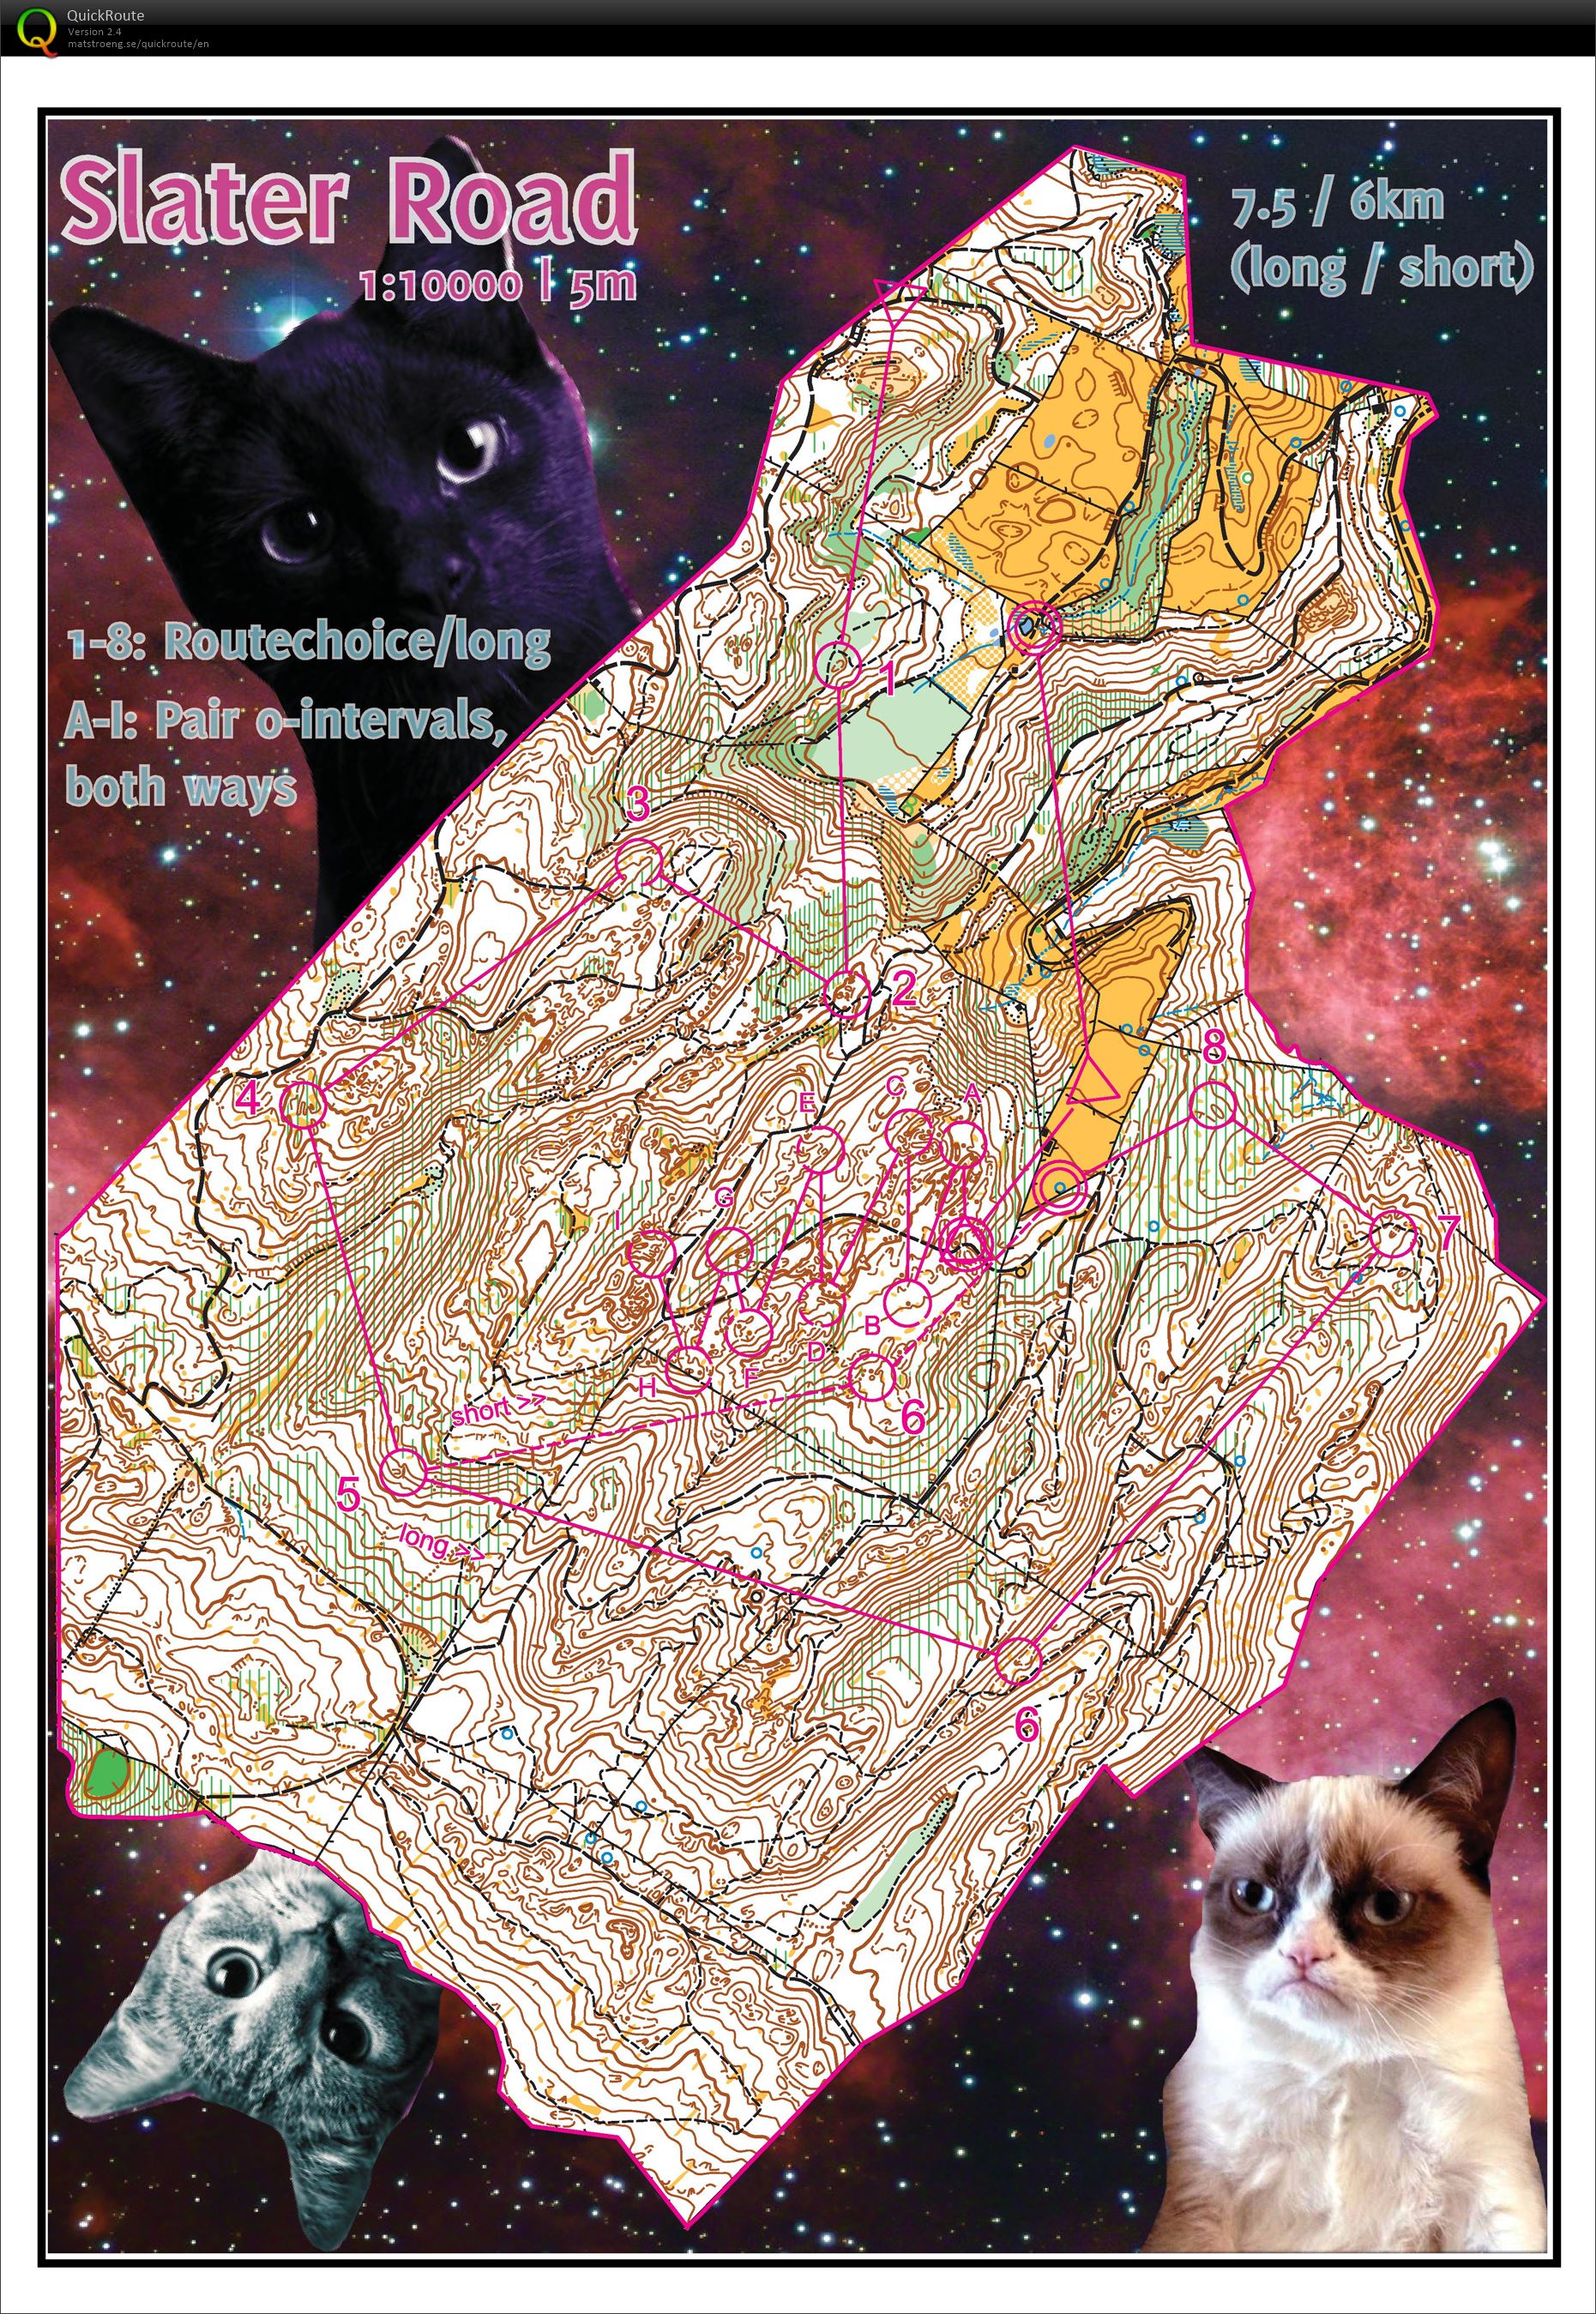 Space Cats - Part 1 (26-04-2014)